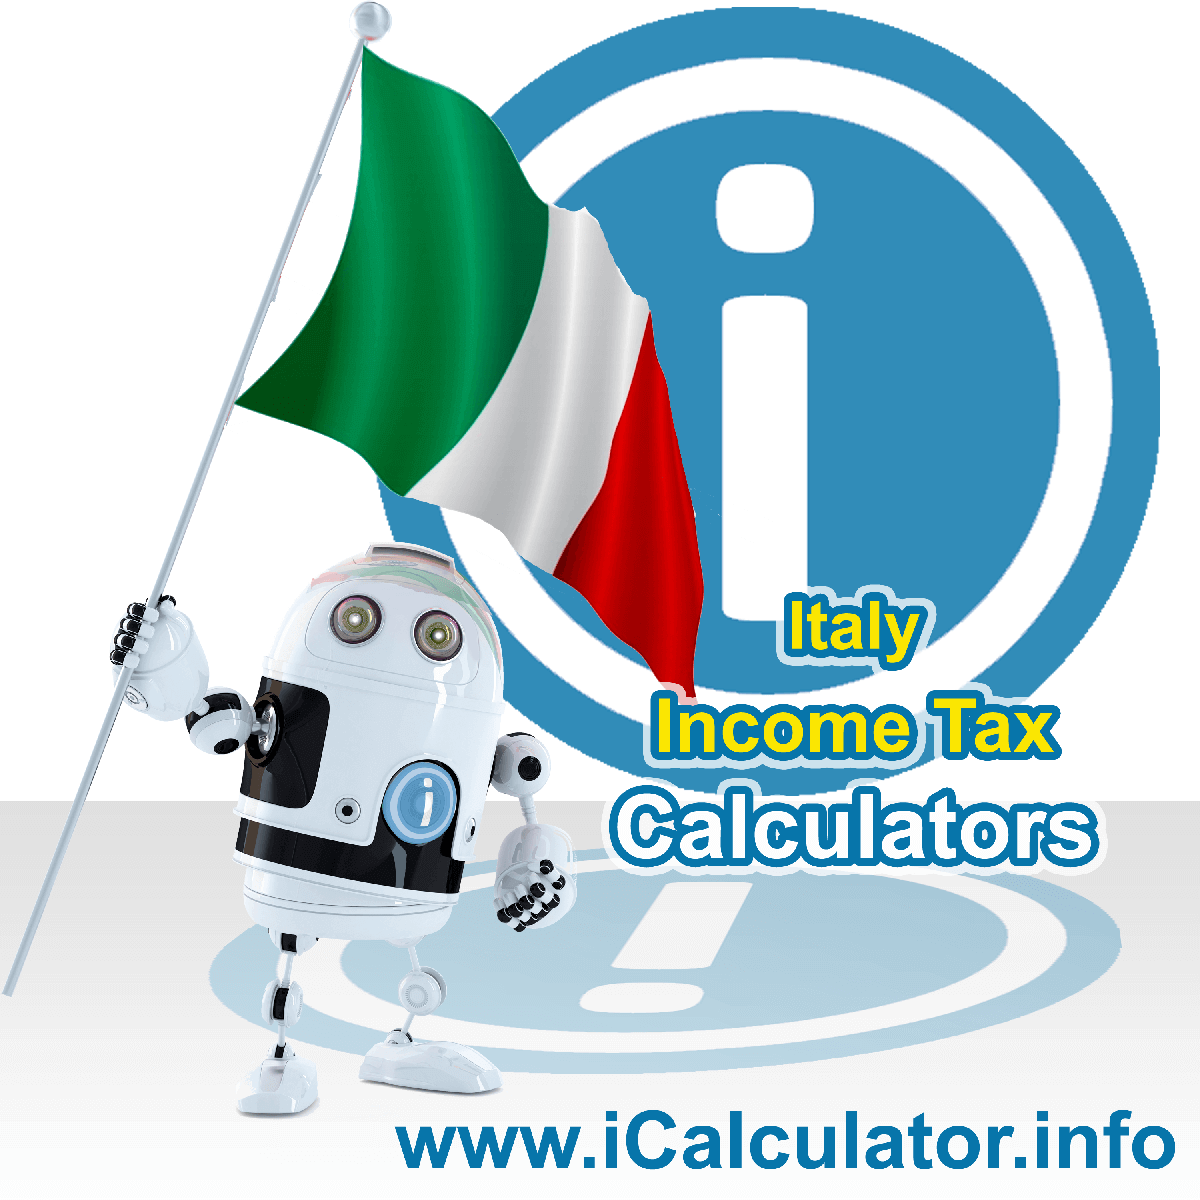 Italy Income Tax Calculator. This image shows a new employer in Italy calculating the annual payroll costs based on multiple payroll payments in one year in Italy using the Italy income tax calculator to understand their payroll costs in Italy in 2023